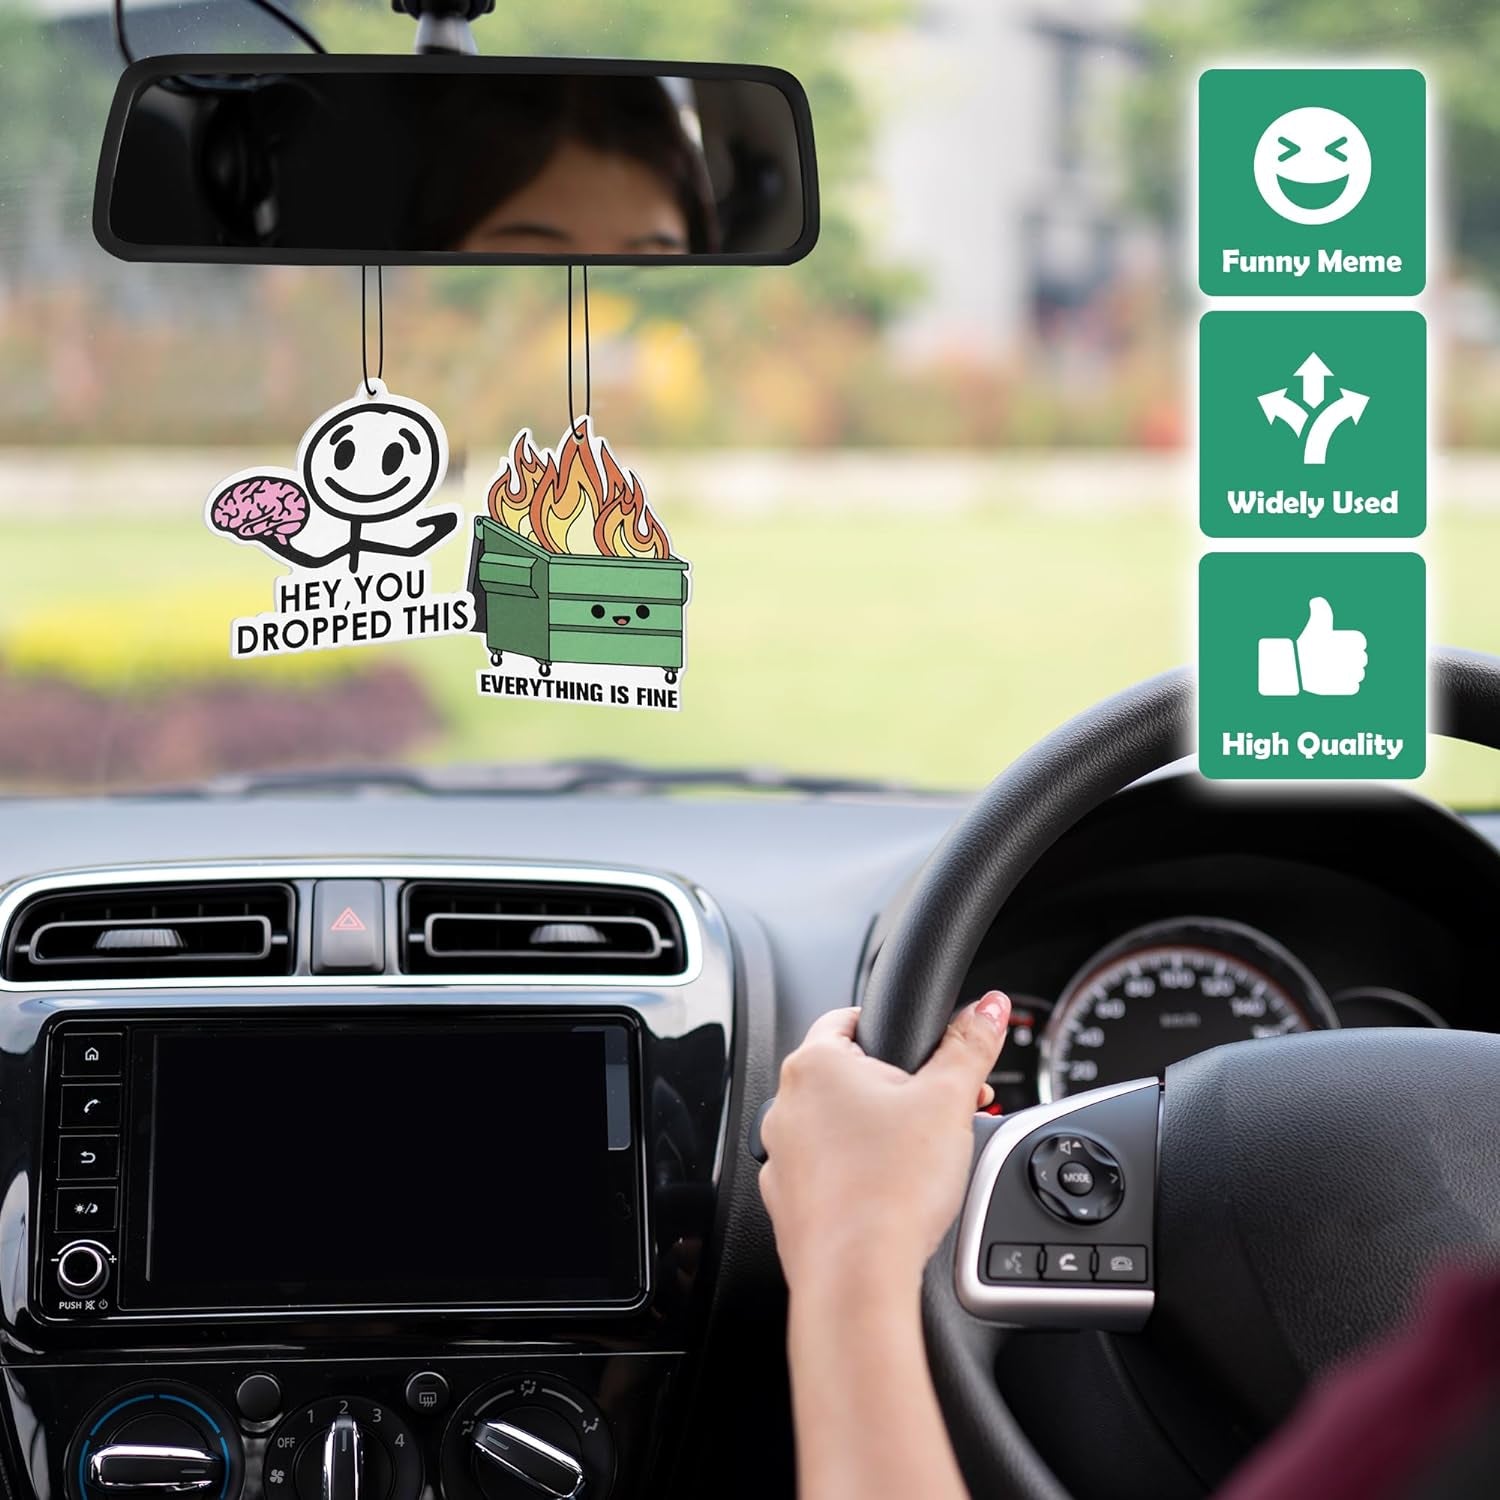 7 Pcs Funny Meme Car Air Fresheners Cute Cartoon Incense Chips Scented Diffuser Rearview Mirror Hanging Pendant Ornaments Decoration Automotive Interior Accessories Party Favors for Women Man